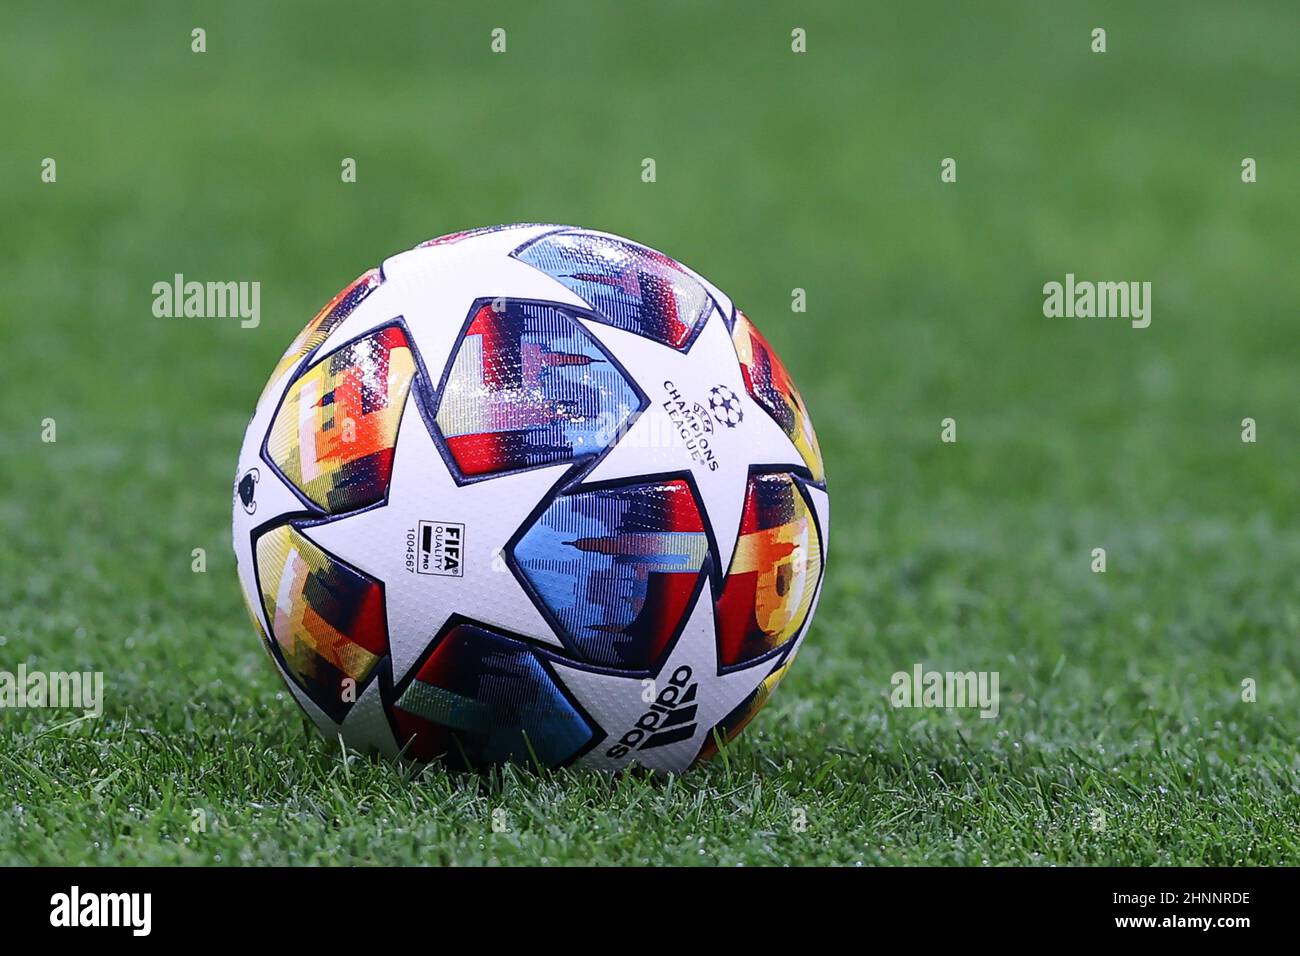 The Adidas official UEFA Champions League match ball Saint Petersburg 22 Final during the UEFA Champions League 2021/22 Round of 16 - First leg football match FC Internazionale and Liverpool FC